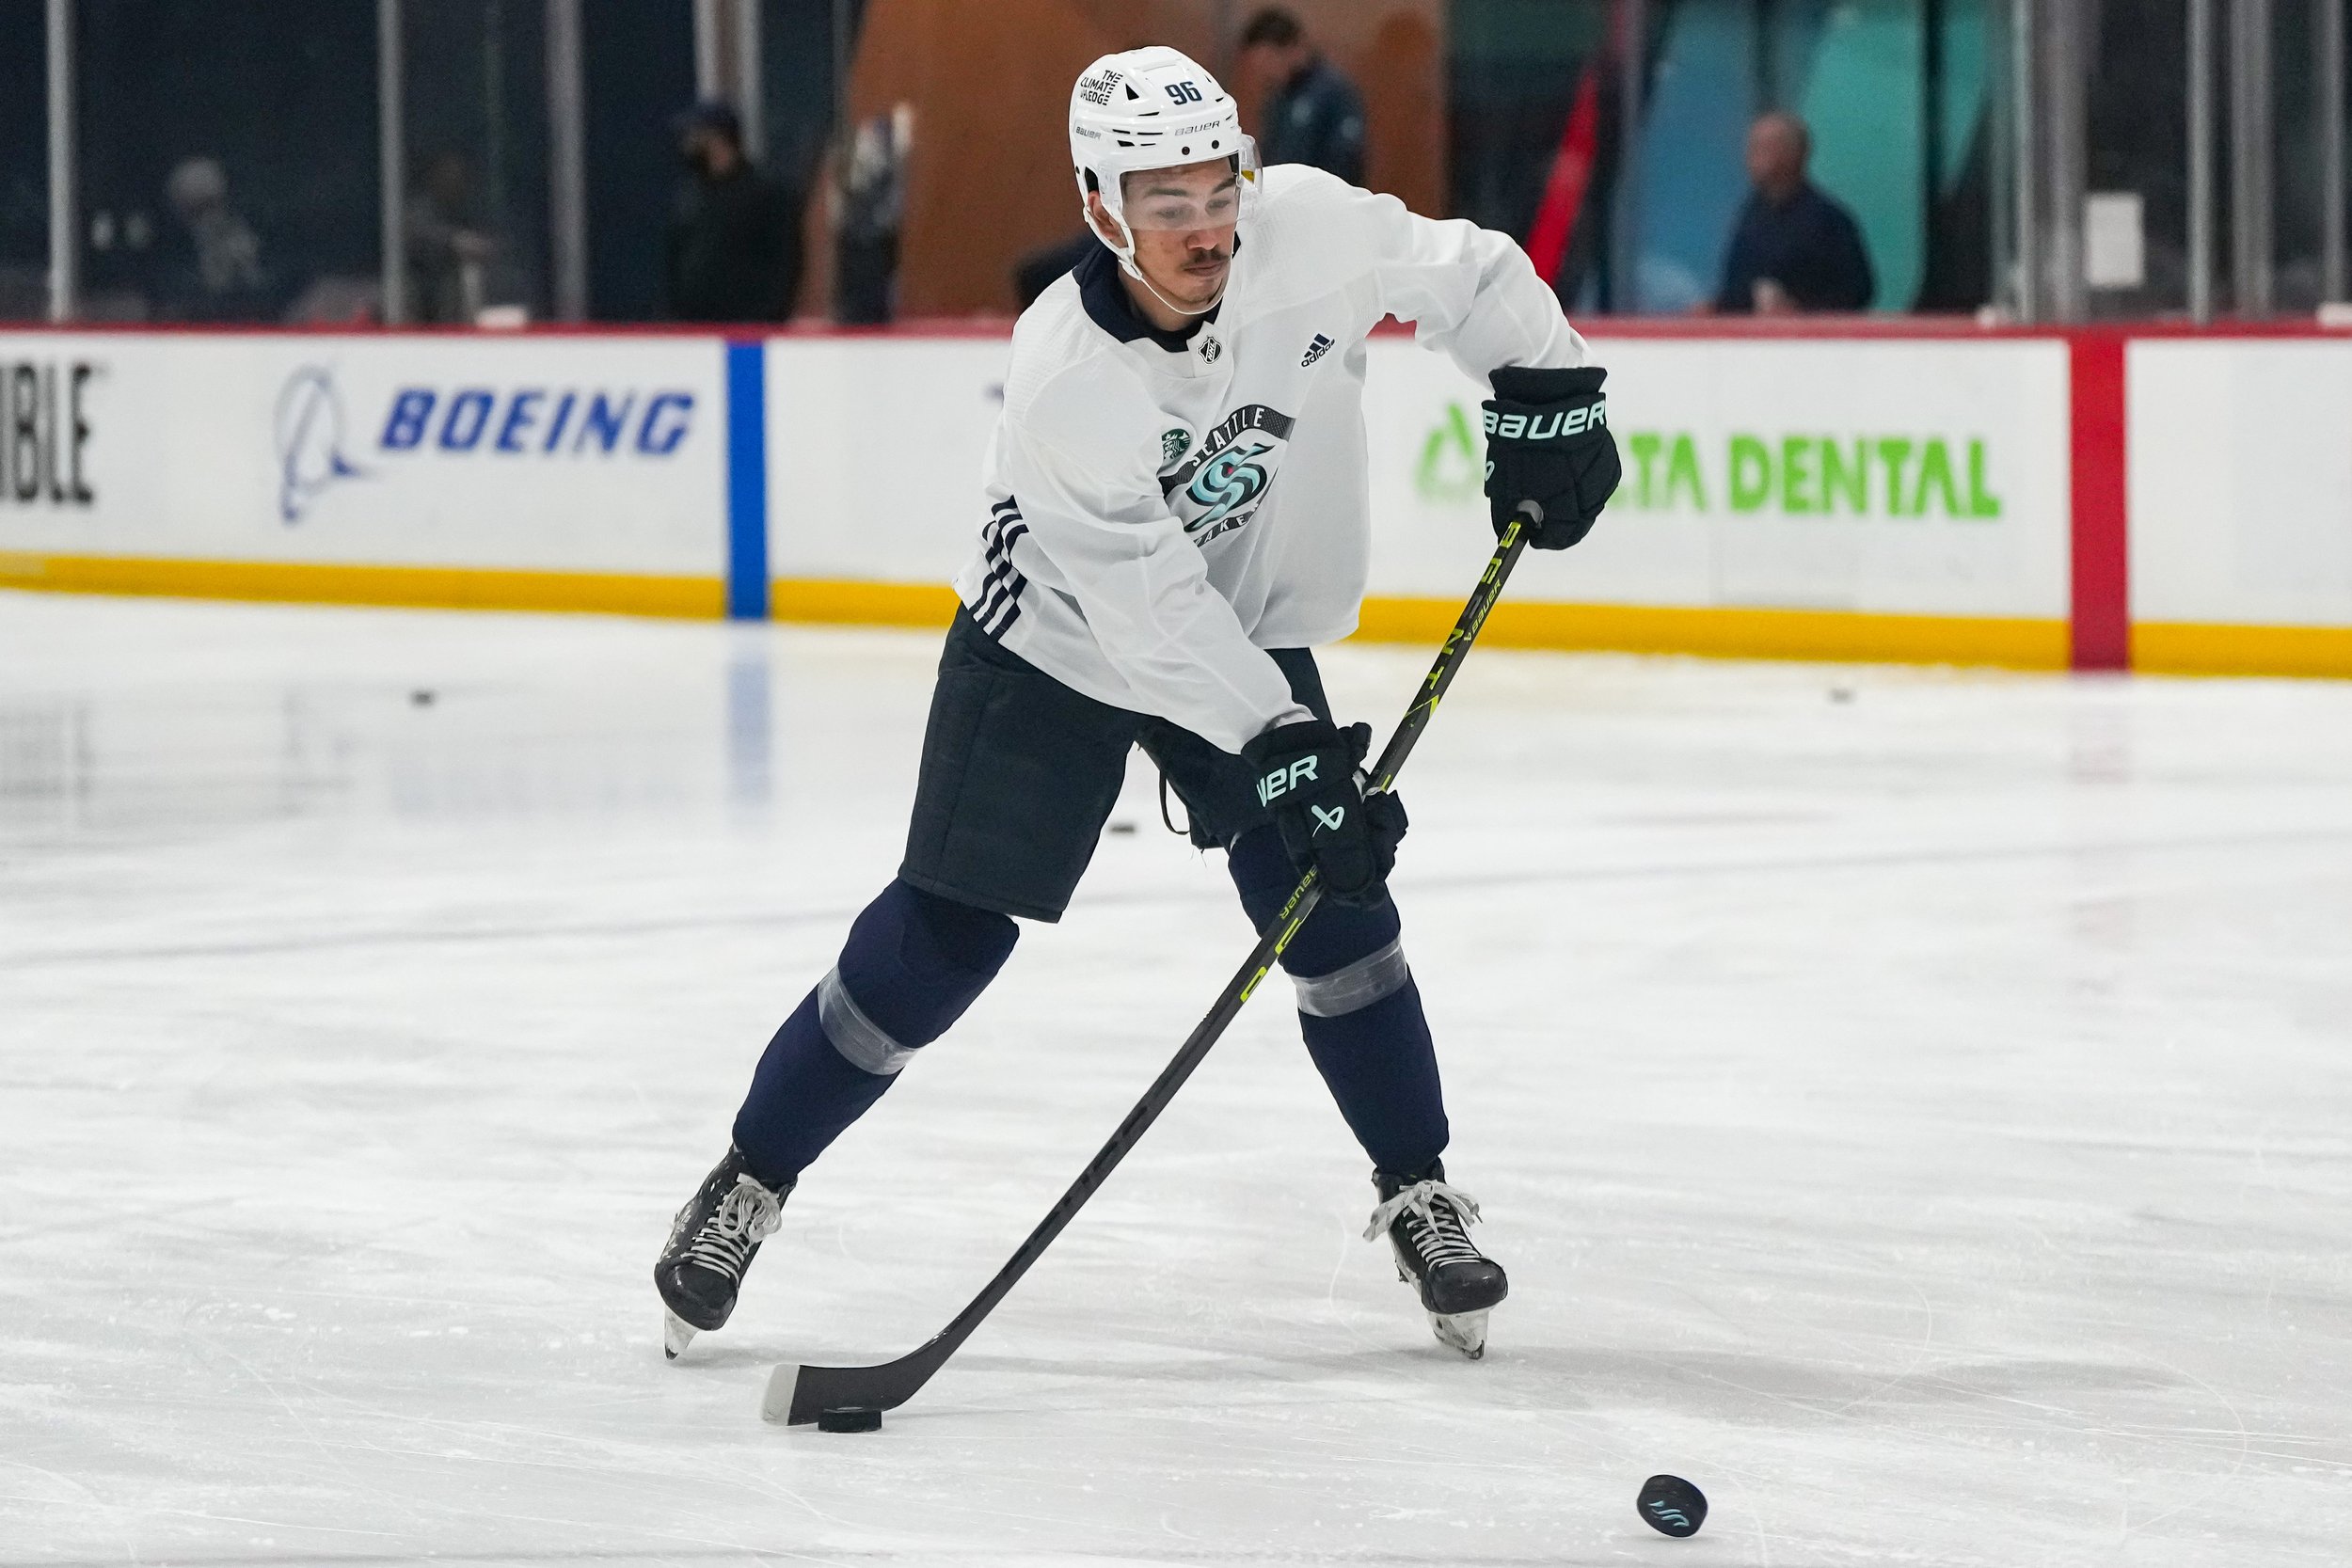 Development camp scrimmage shows fast paced Seattle Kraken prospects — Converge Media